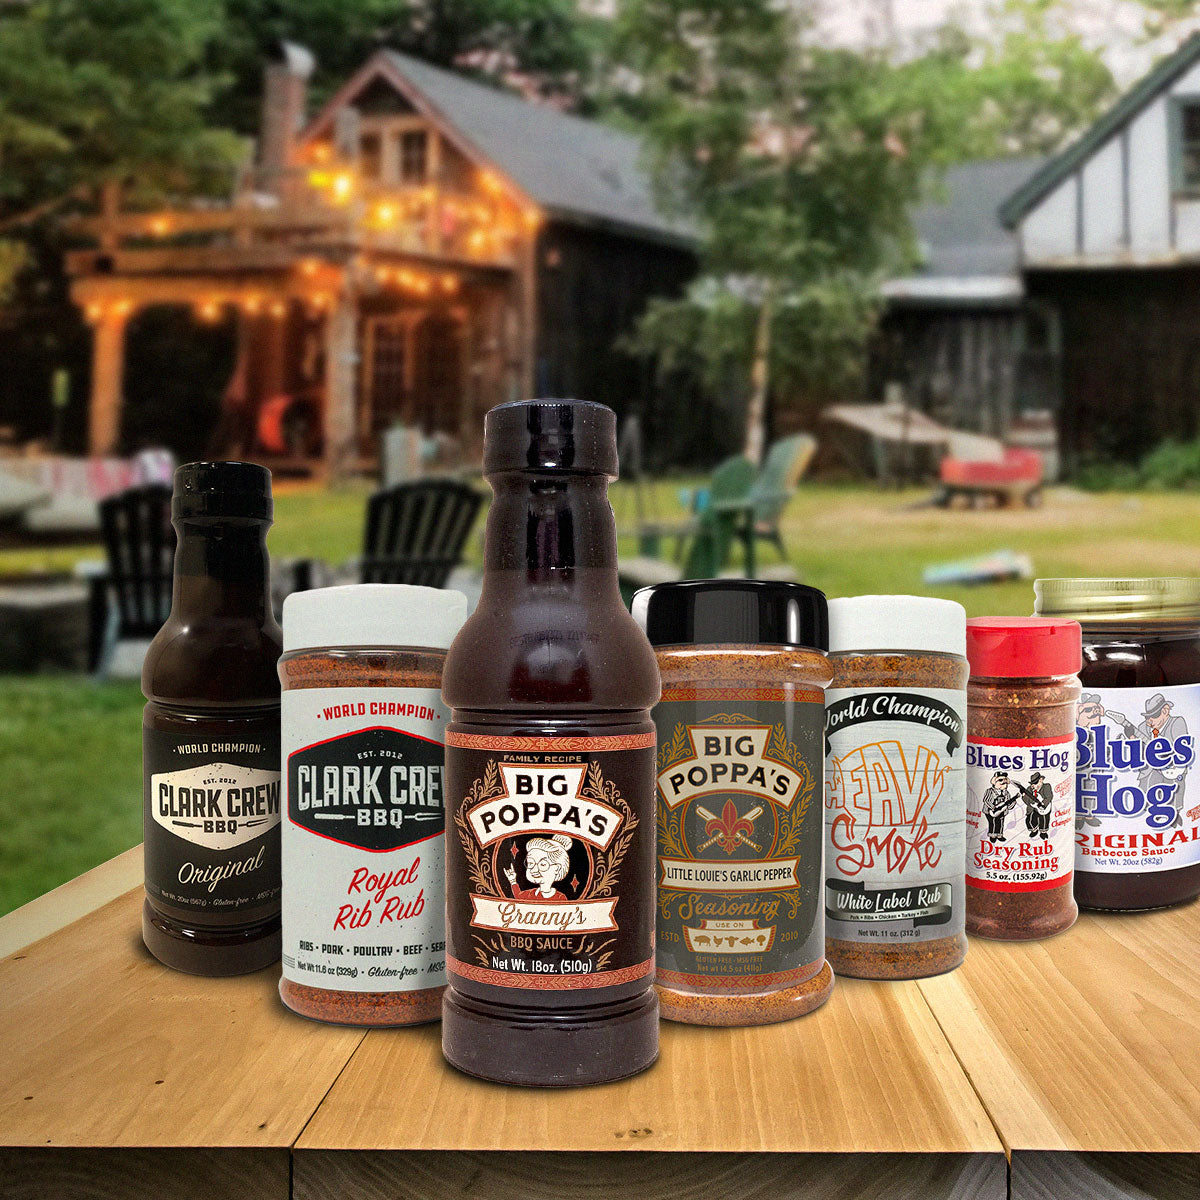 Image with grouping of sauces and BBQ seasonings from Big Poppa Smokers, Clark Crew BBQ, Heavy Smoke, Blues Hog